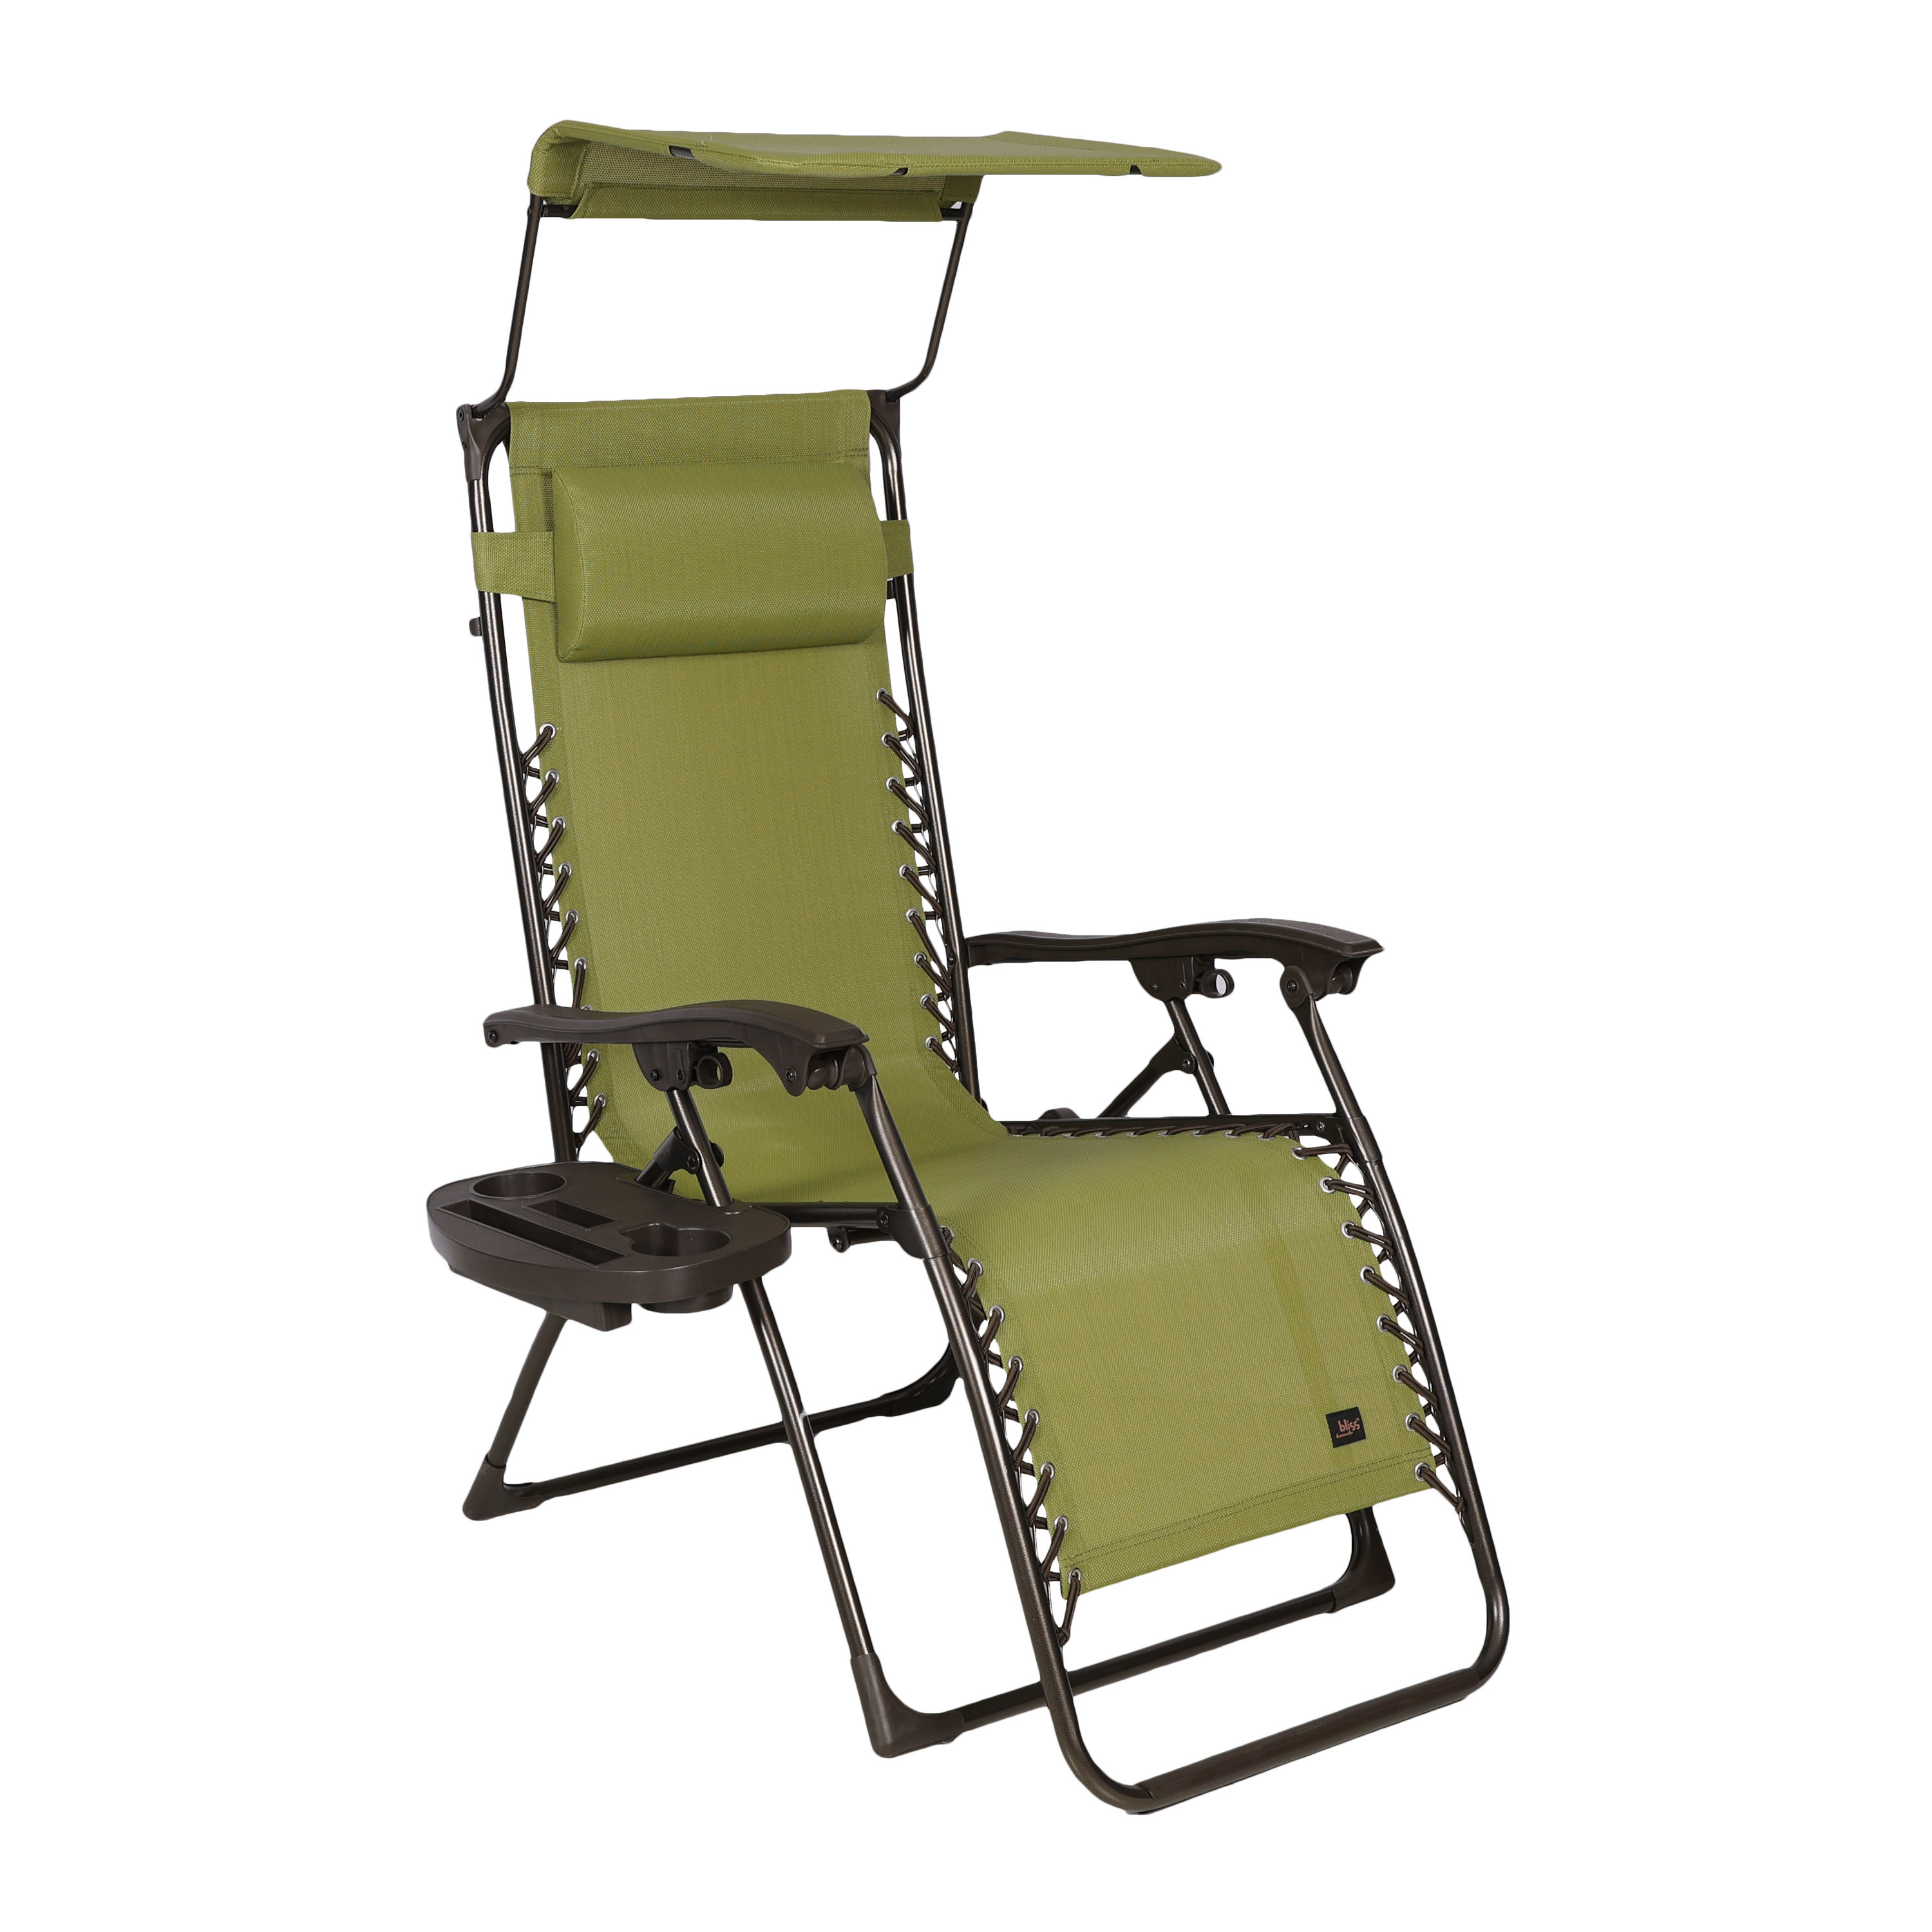 Bliss Hammocks 26" Wide Base Model Zero Gravity Chair w/ Canopy, Pillow, & Drink Tray Folding Outdoor Lawn, Deck, Patio Adjustable Lounge Chair, 300lbs. Weather and Rust Resistant, Sage Green - image 1 of 4